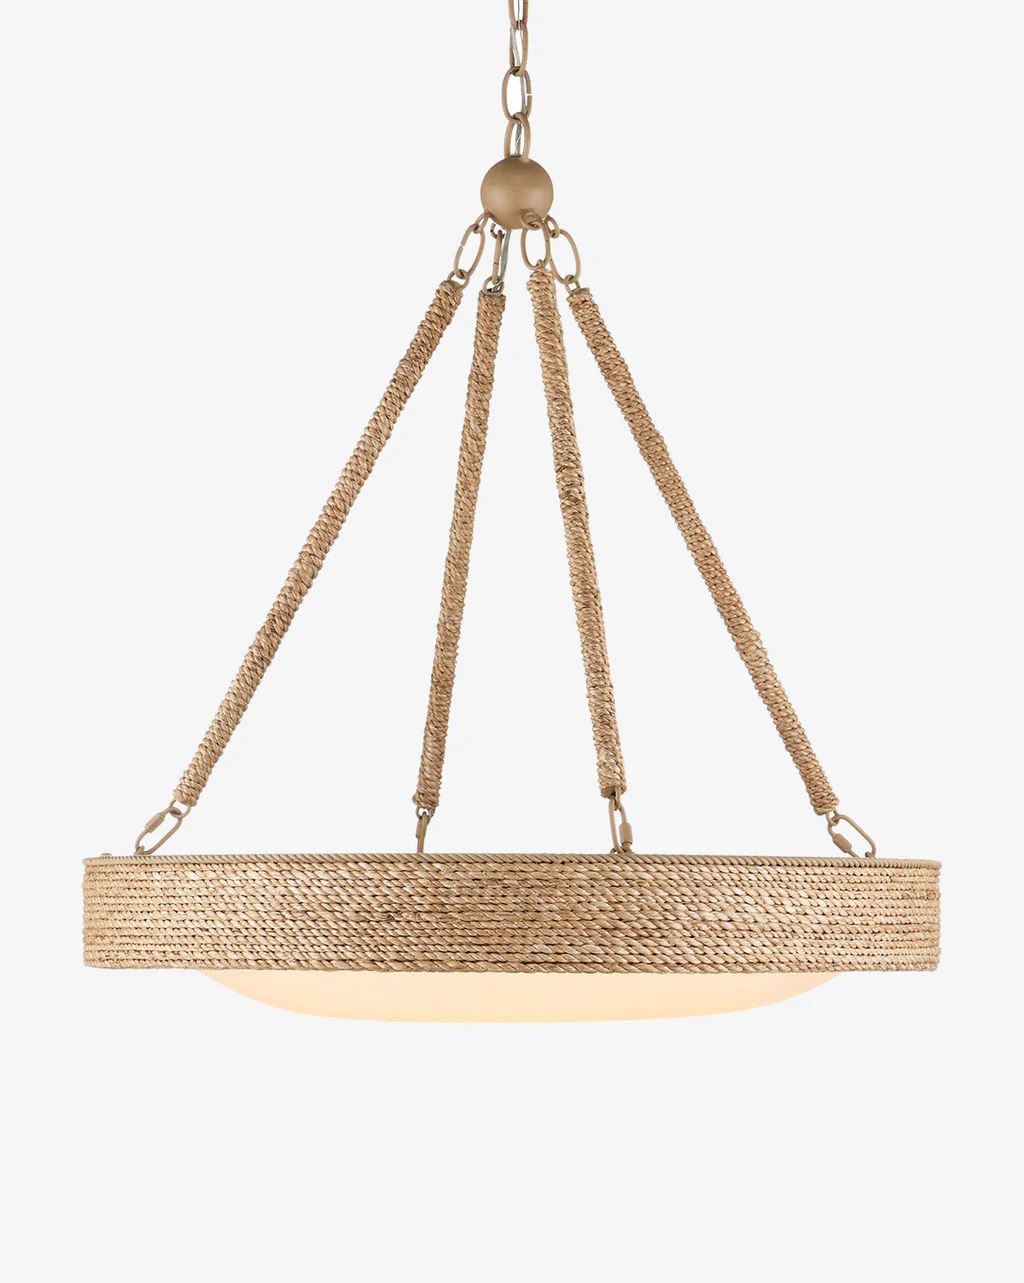 Hopscotch Chandelier | McGee & Co.